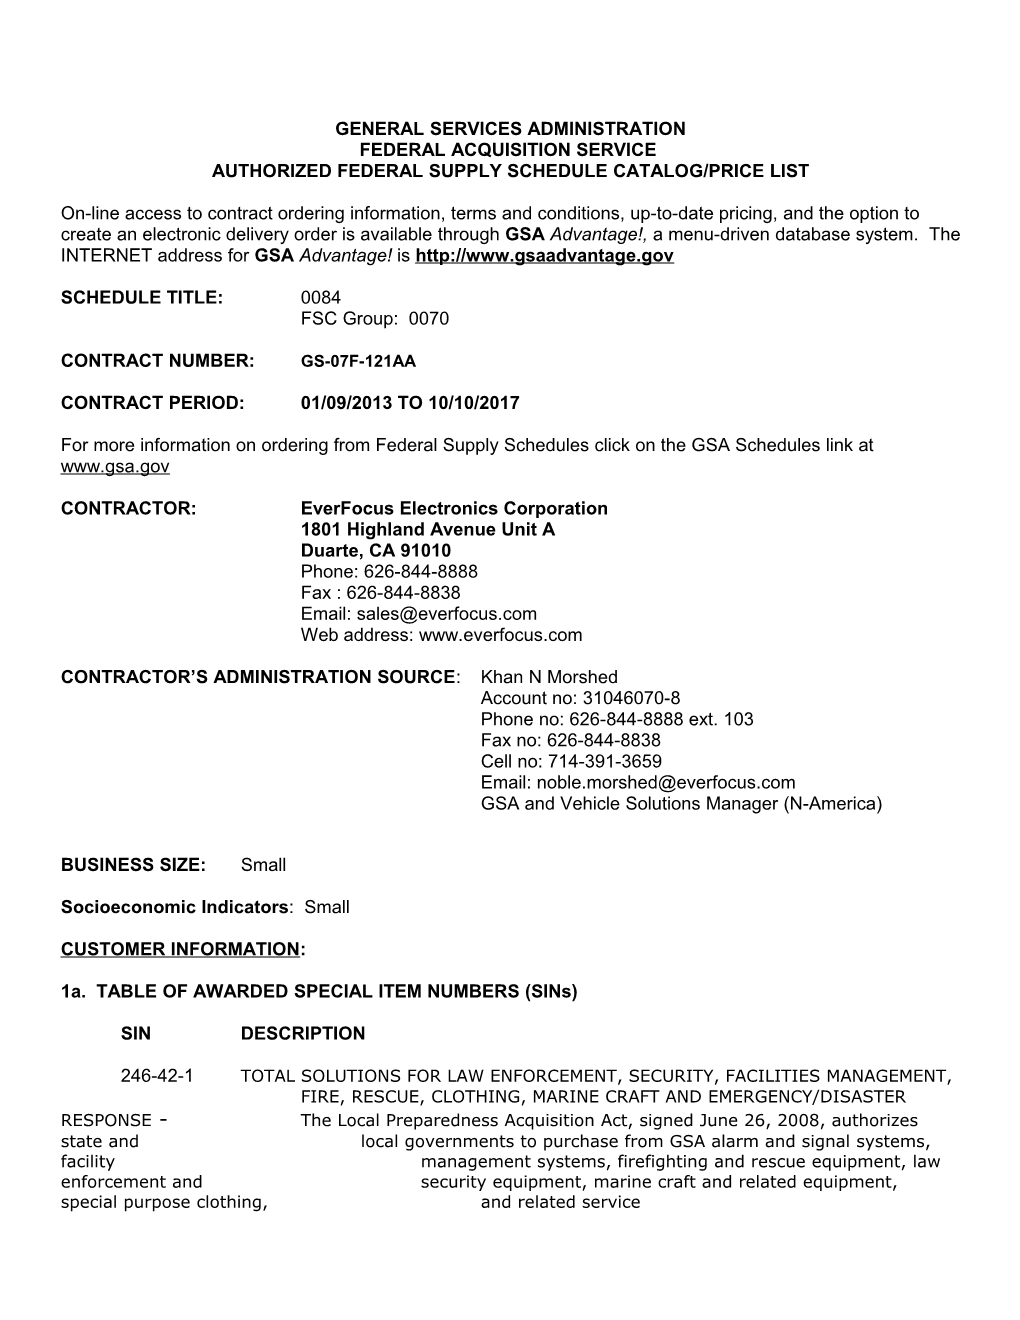 Standard Form 1449, Contract For Commercial Items (Cont’D) Page 1A